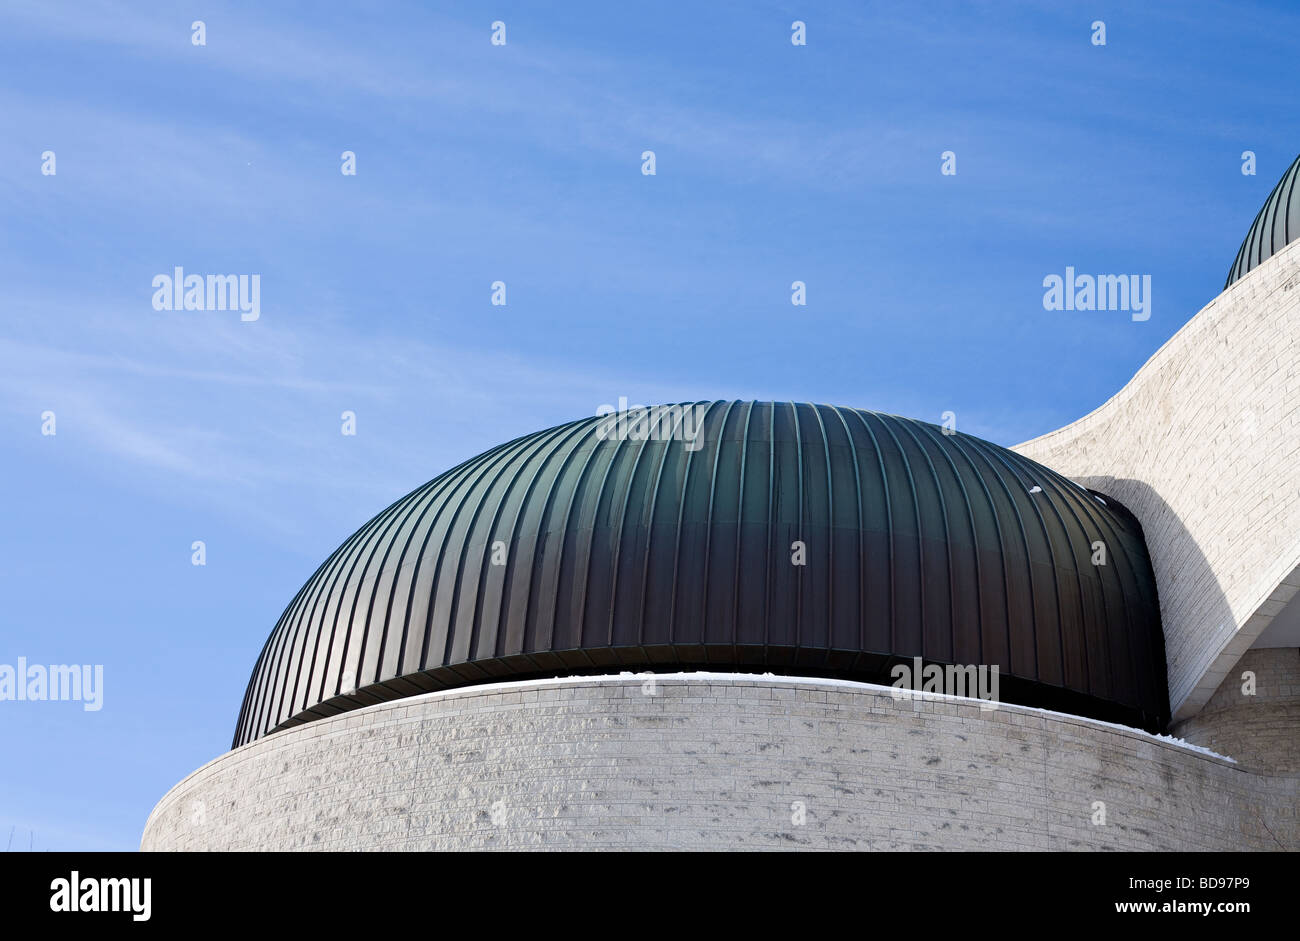 Museum of Civilization Dome. One of the copper topped domes of the Civilization museum. Stock Photo